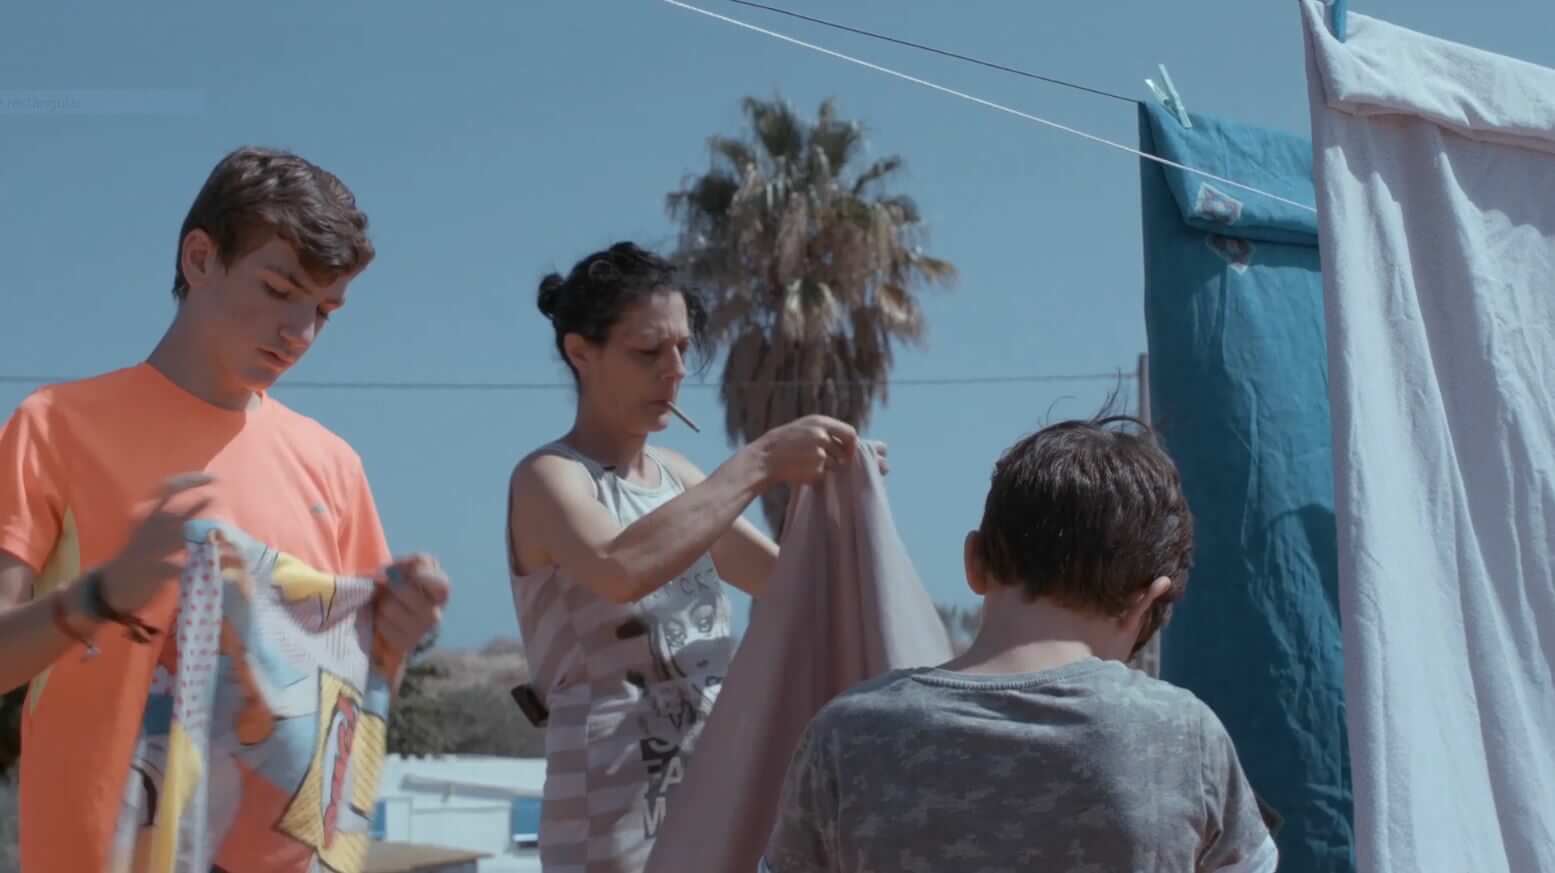 A still from The Boy and the Suit of Lights. A woman smoking a cigarette holds up a large piece of fabric. She stands in front of a palm tree and a little boy is in front of her, his back facing the camera.